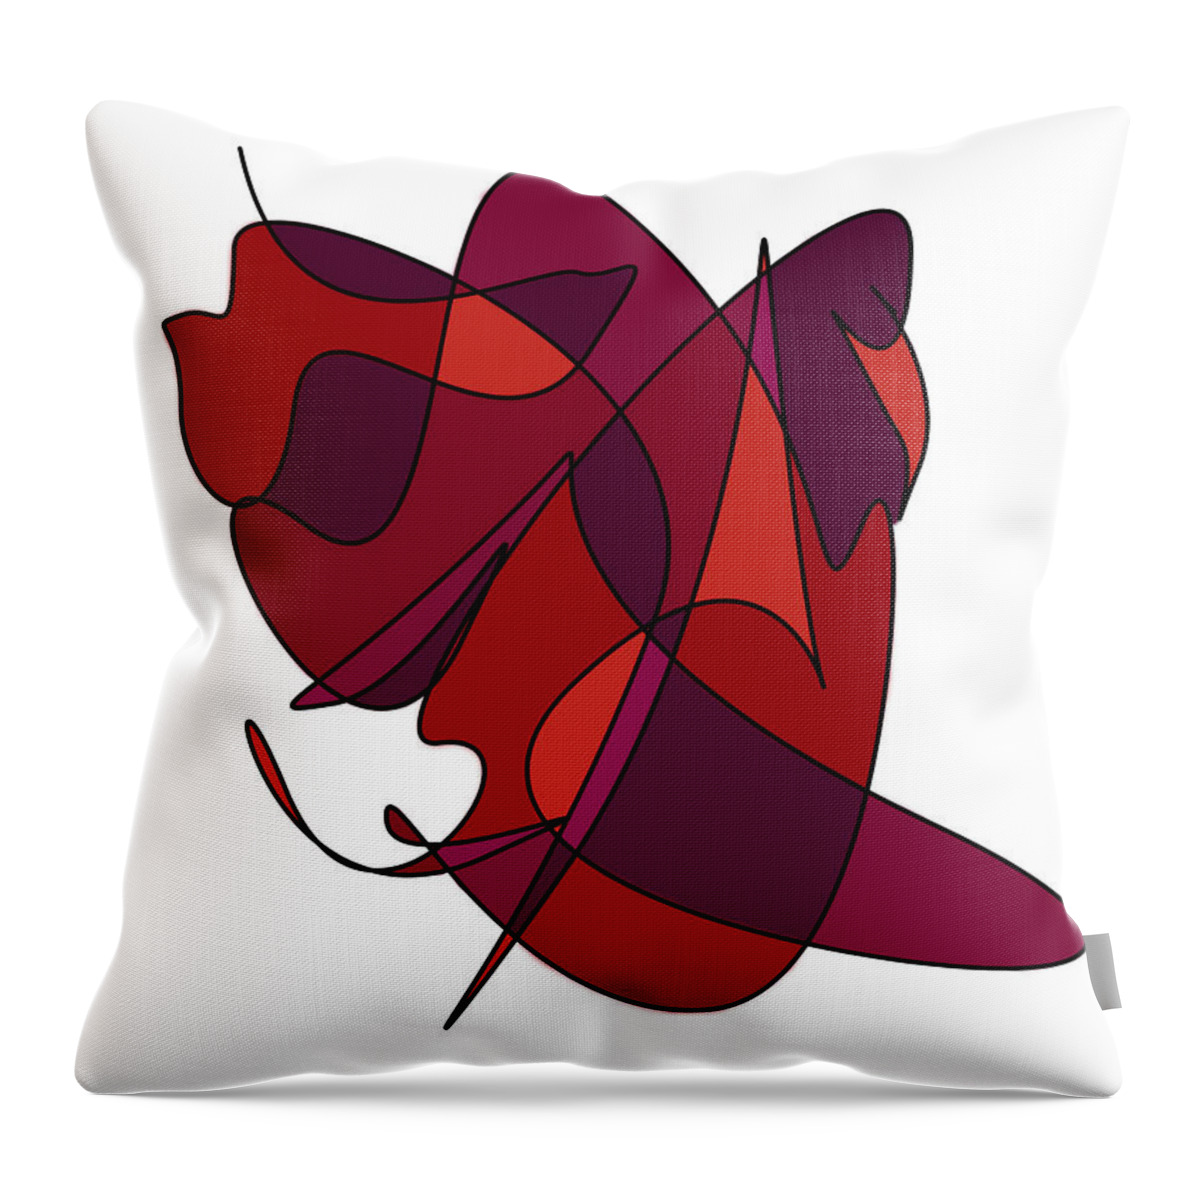 Abstract Throw Pillow featuring the digital art Abstract Lines And Curves In Red by Kirt Tisdale